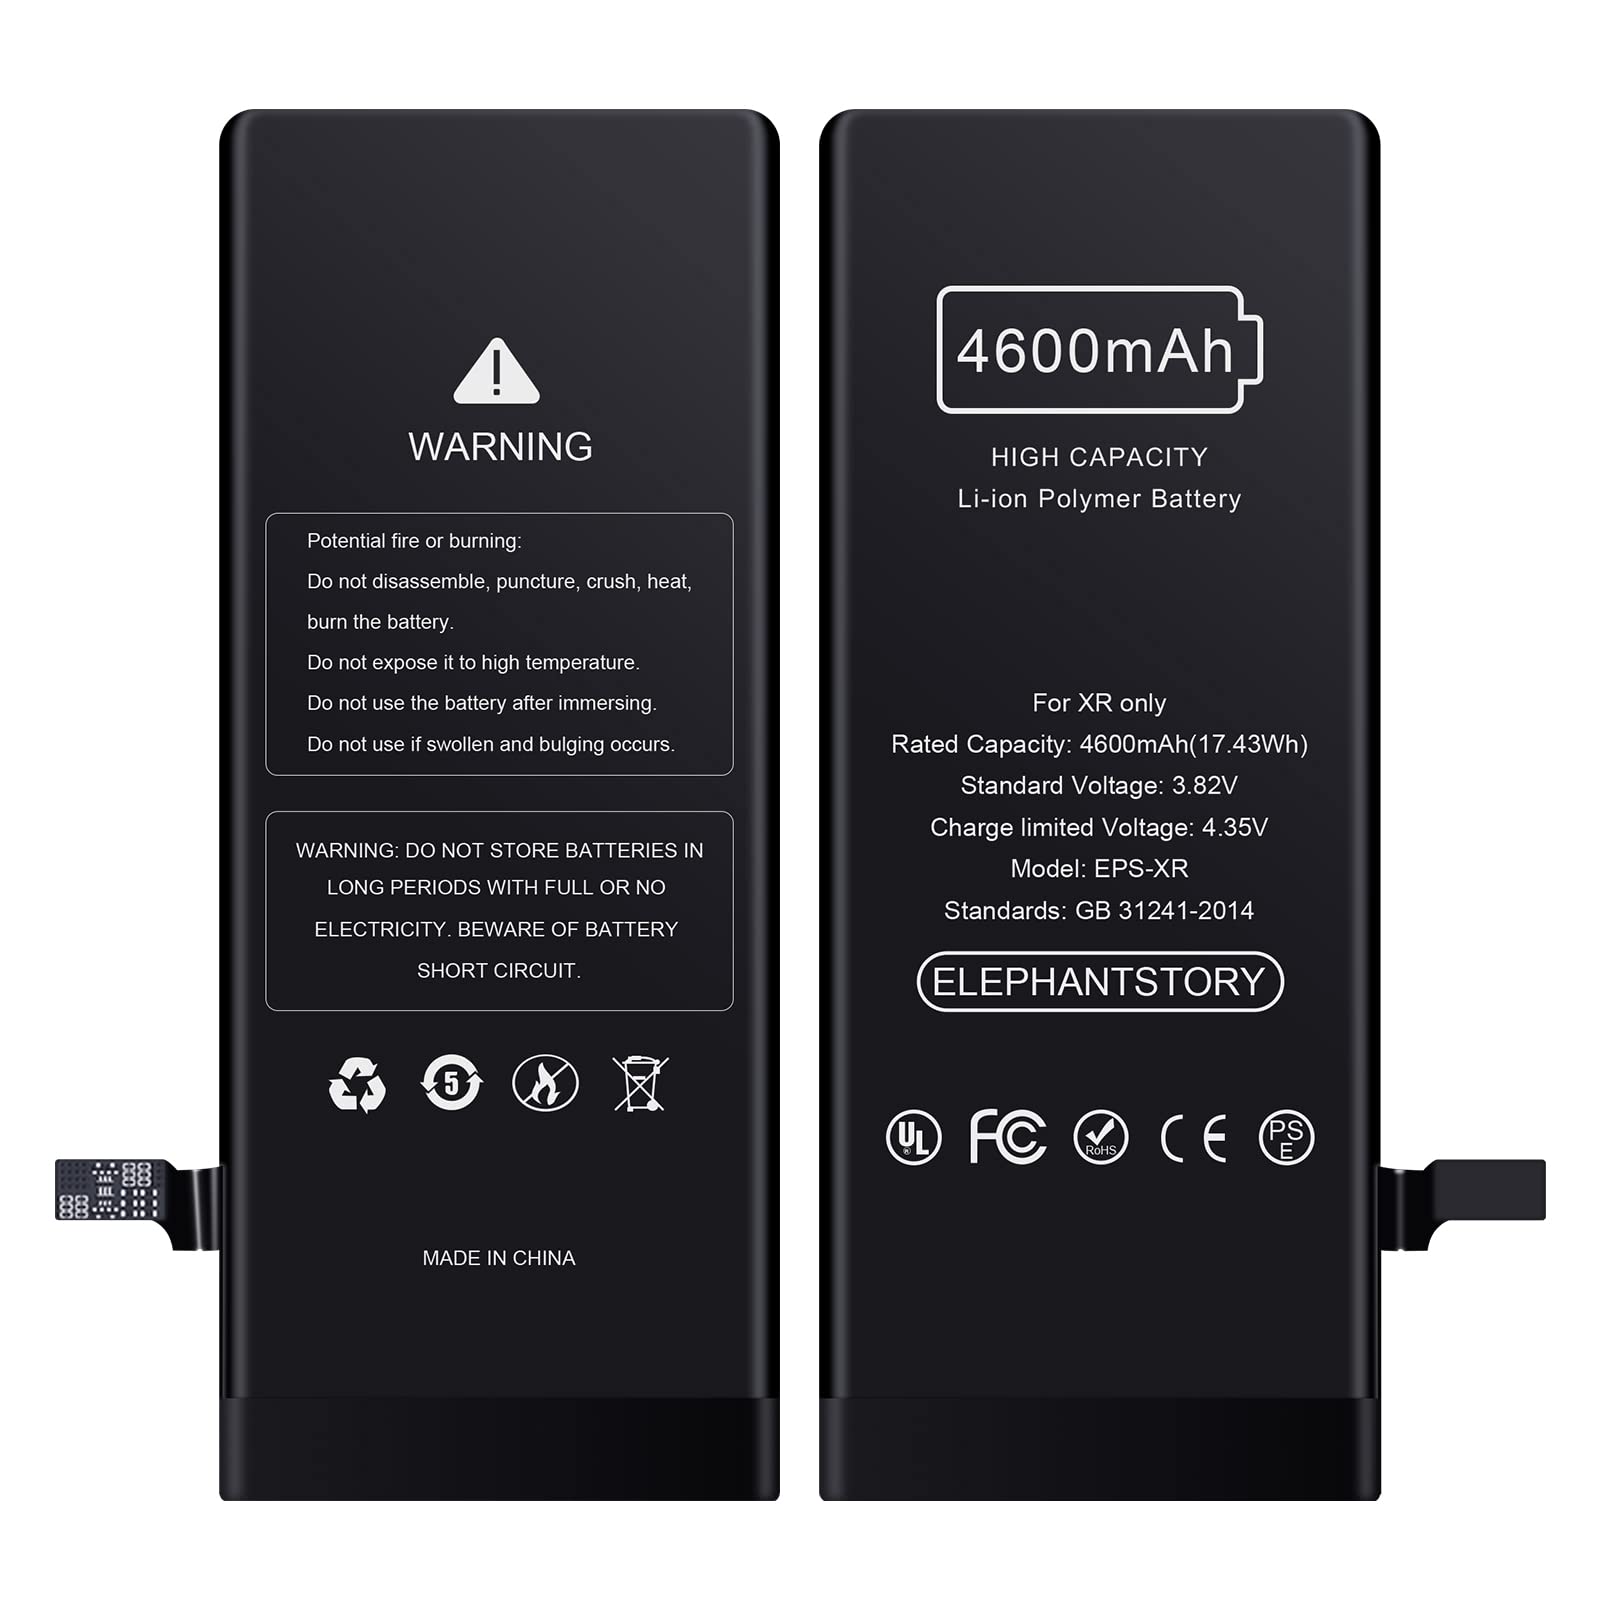 ElephantStory Battery for iPhone XR Battery Replacement, 4600mAh High Capacity New 0 Cycle Internal iPhone XR Battery fit for Model A1984, A2105, A2106, A2107,with Complete Repair Tool